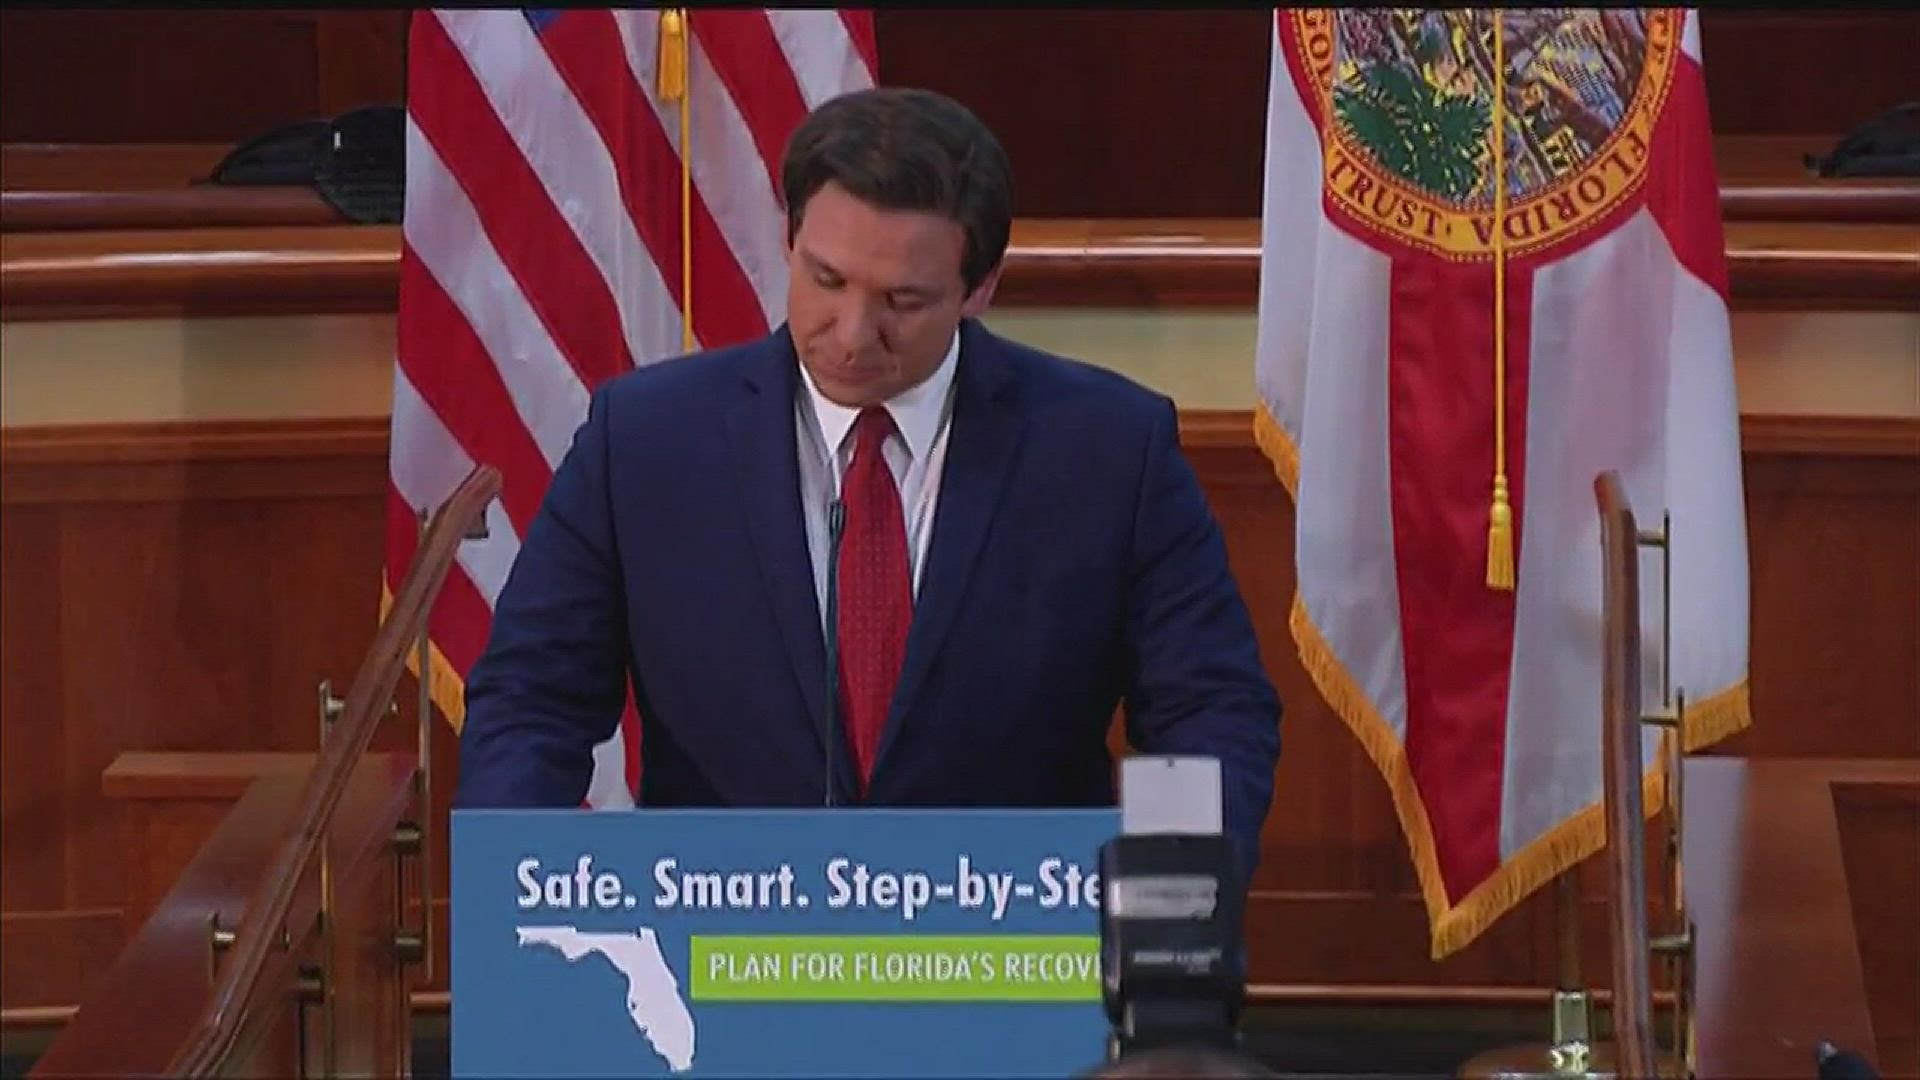 Florida Gov. Ron DeSantis explained the first phase of reopening Florida, which will begin Monday, May 4.